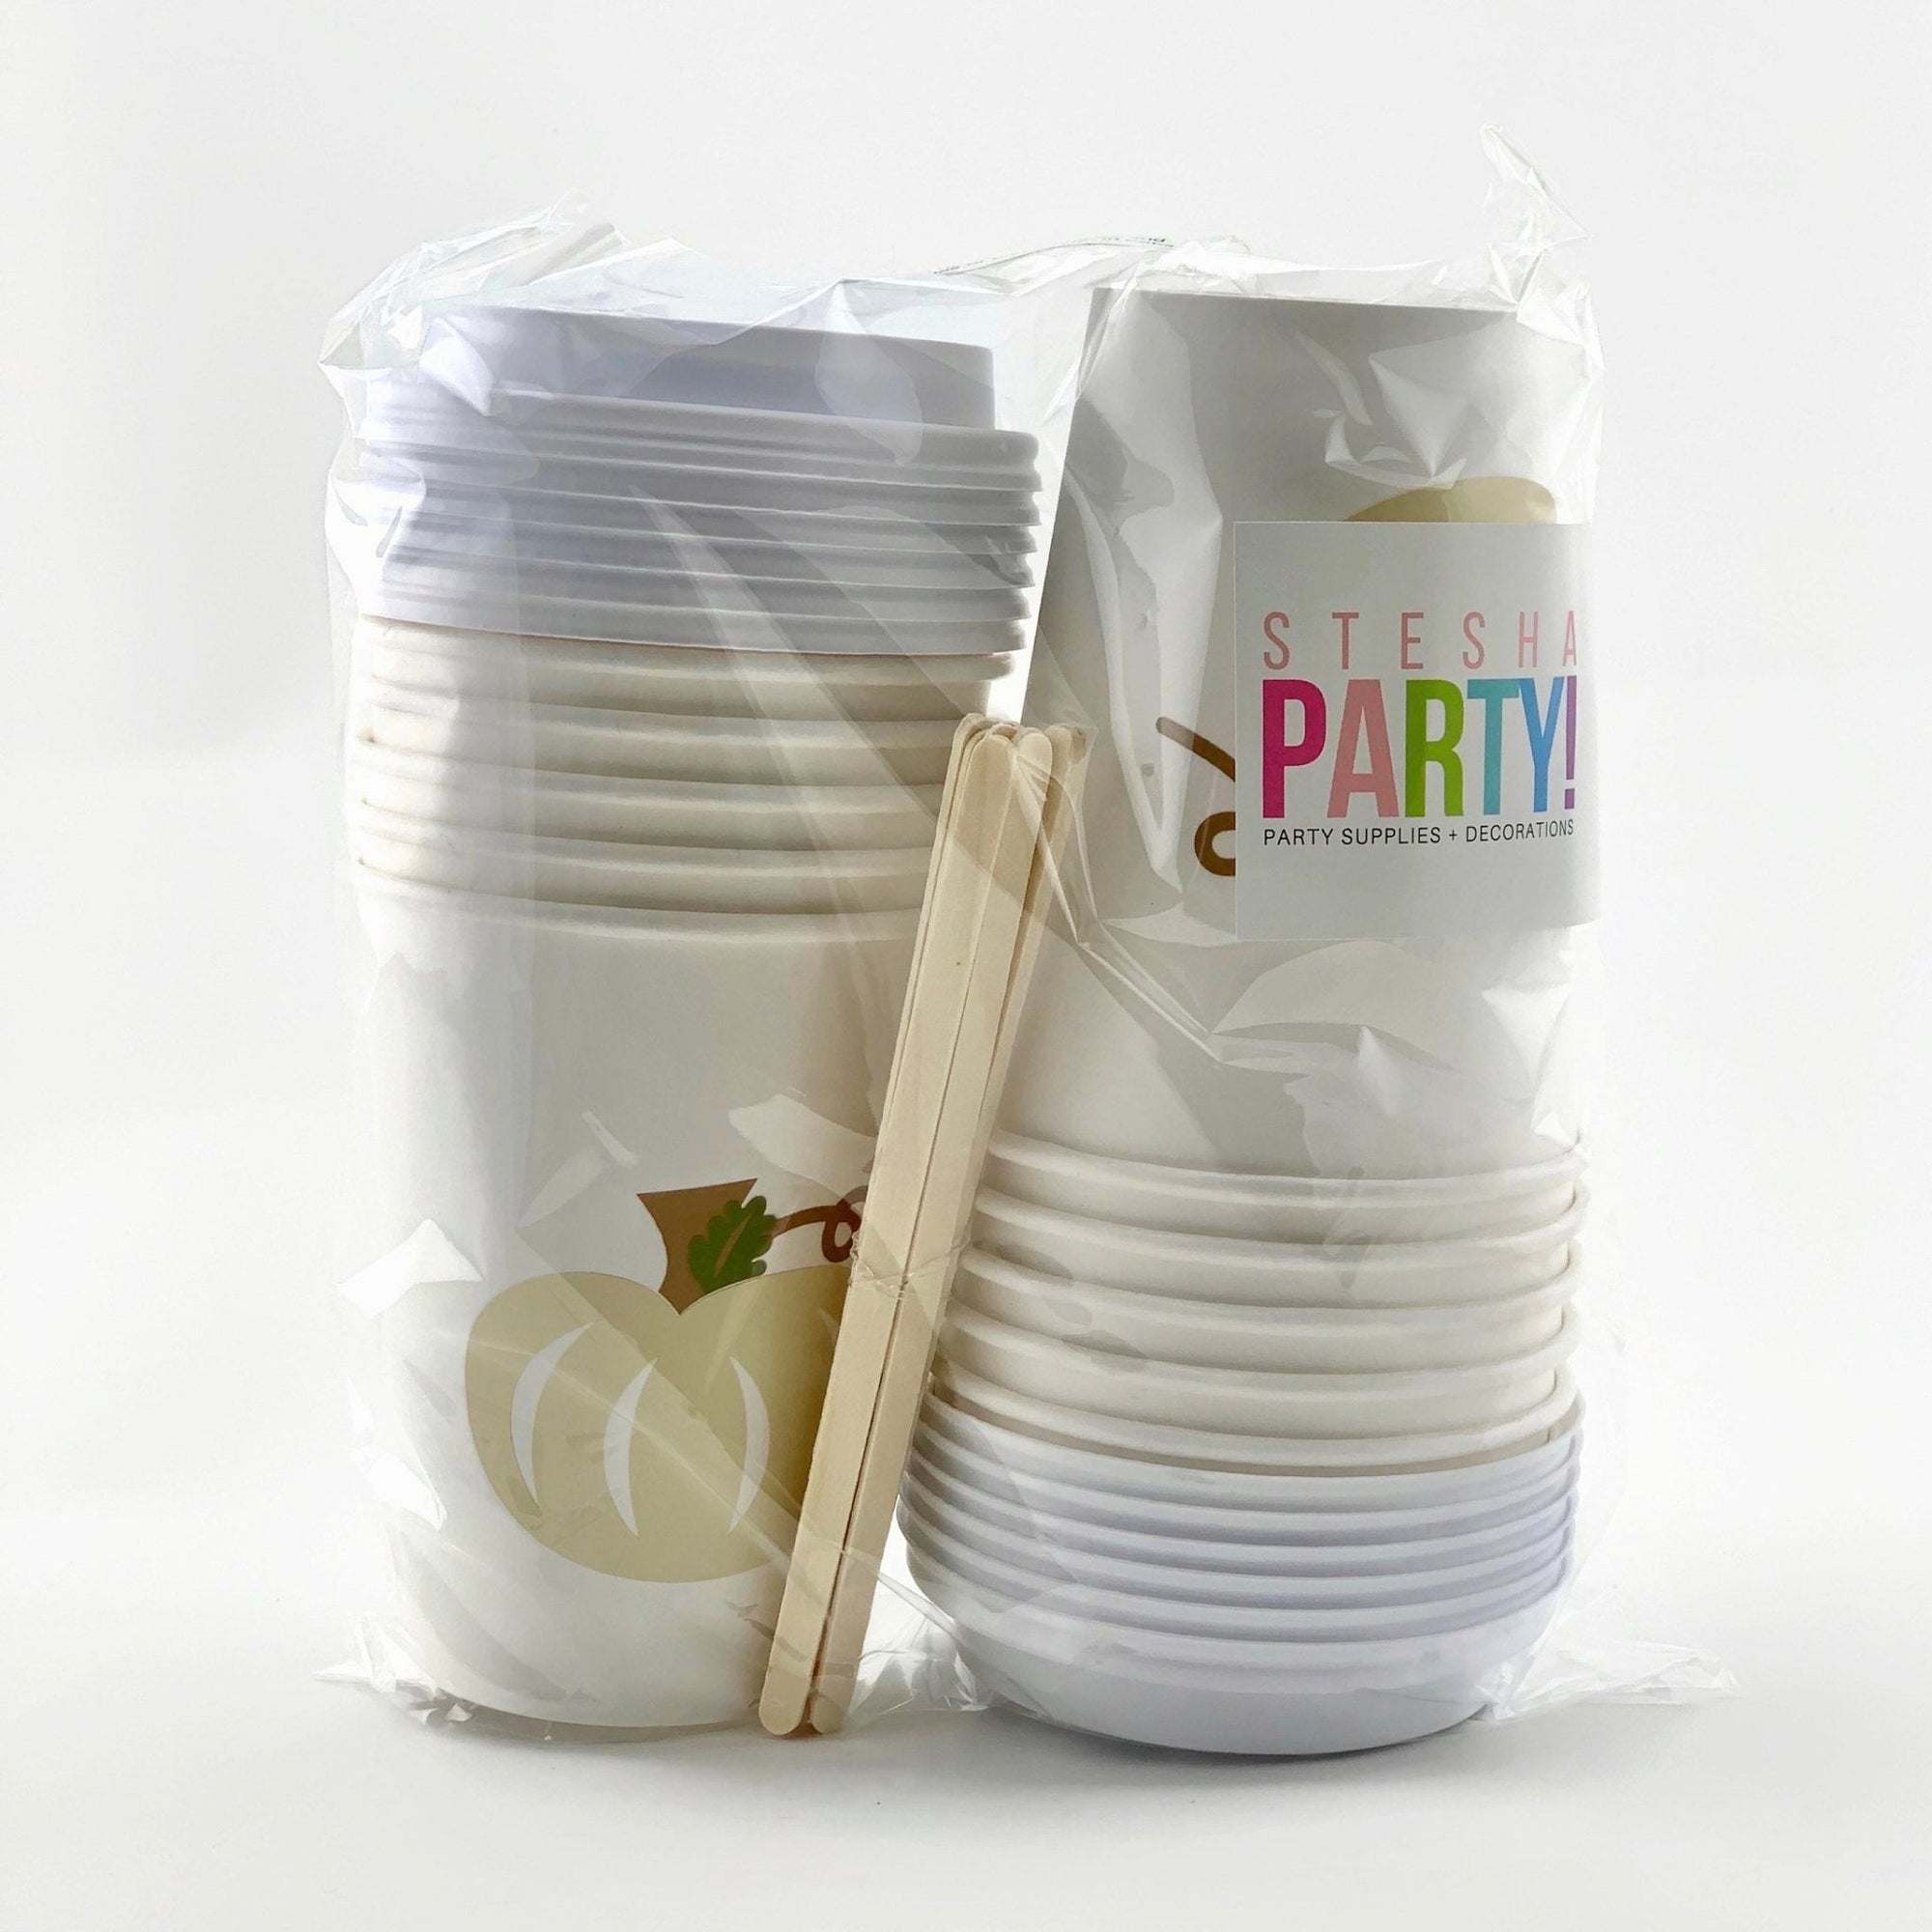 Lidded Pumpkin Party Coffee Cups - Stesha Party